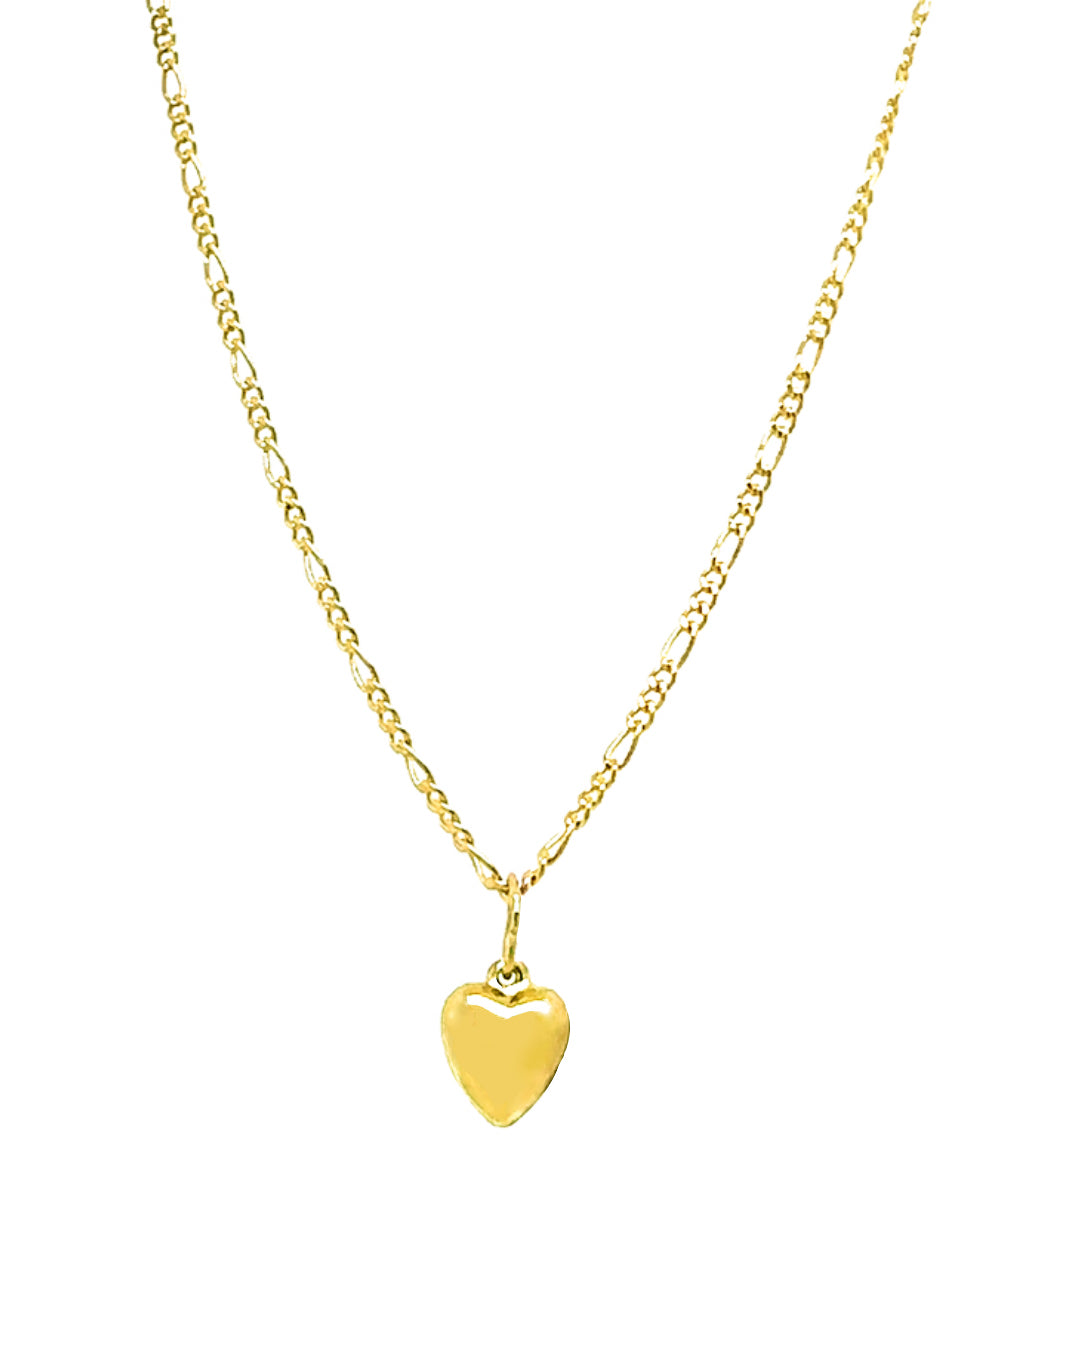 14k gold fill small puffy love heart of gold pendant on a Figaro necklace chain 